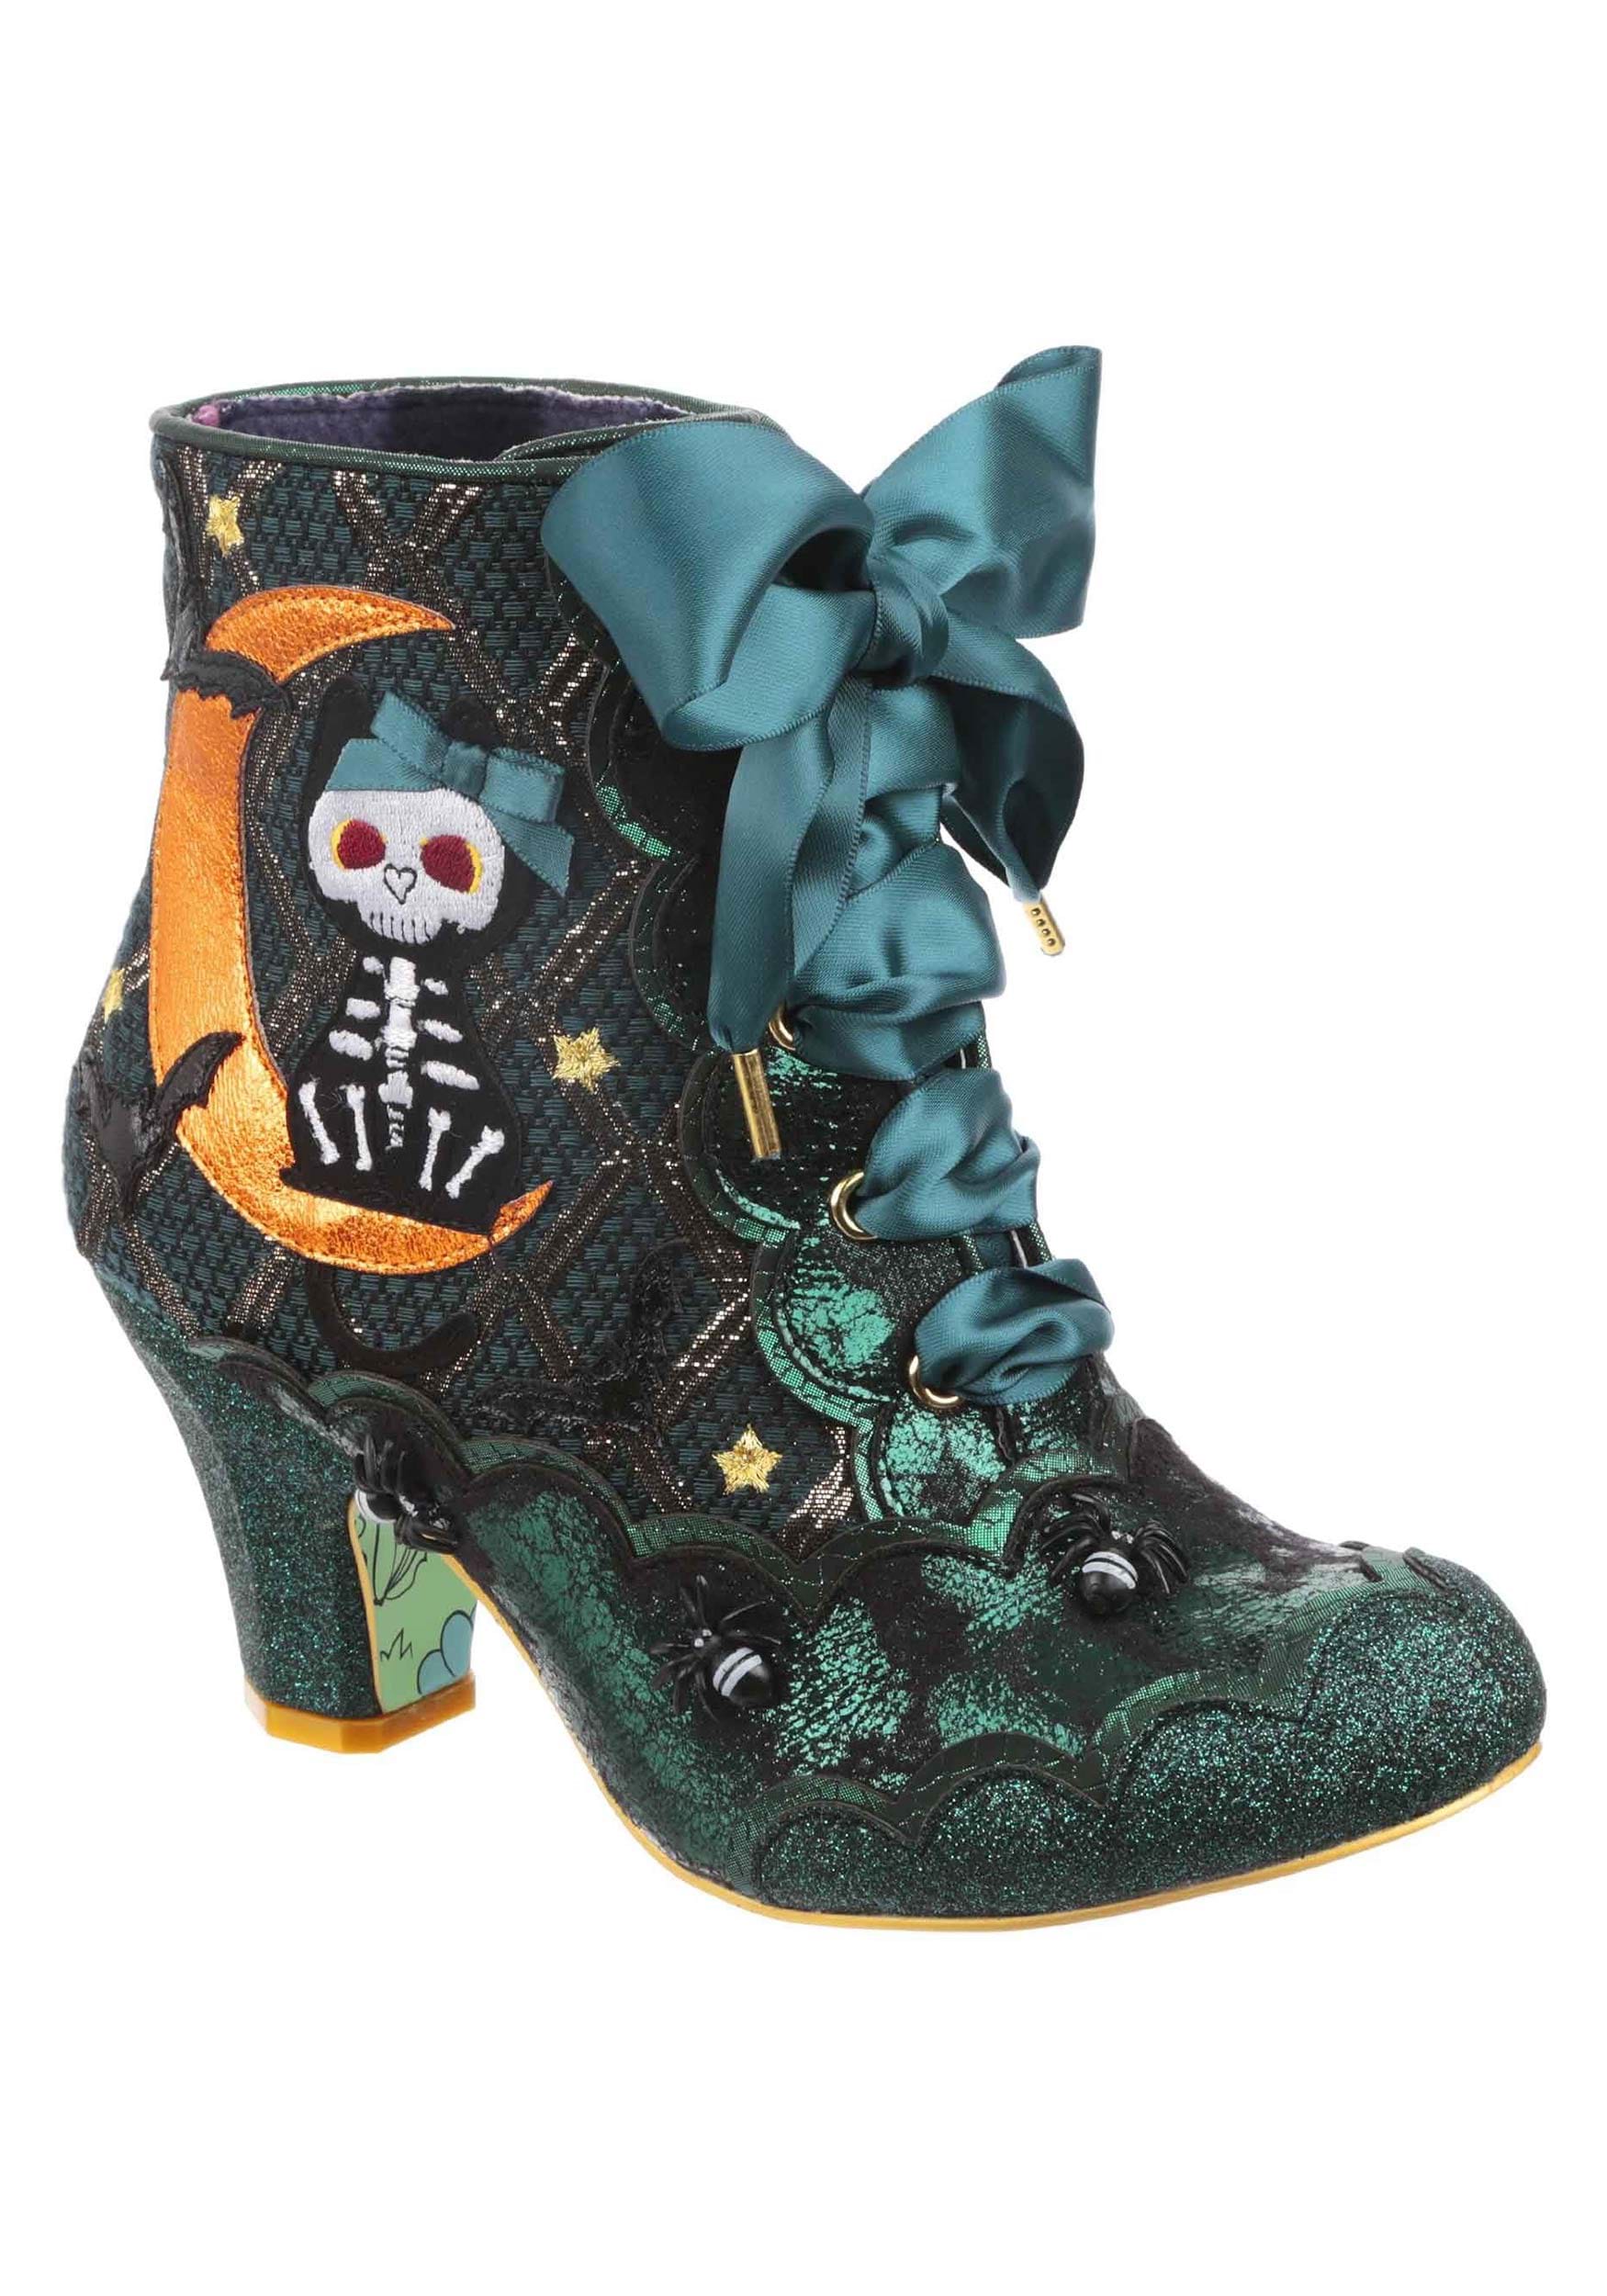 Image of Irregular Choice Kitty in the Moon Ankle Boot Heel ID IRR4405-17A-10